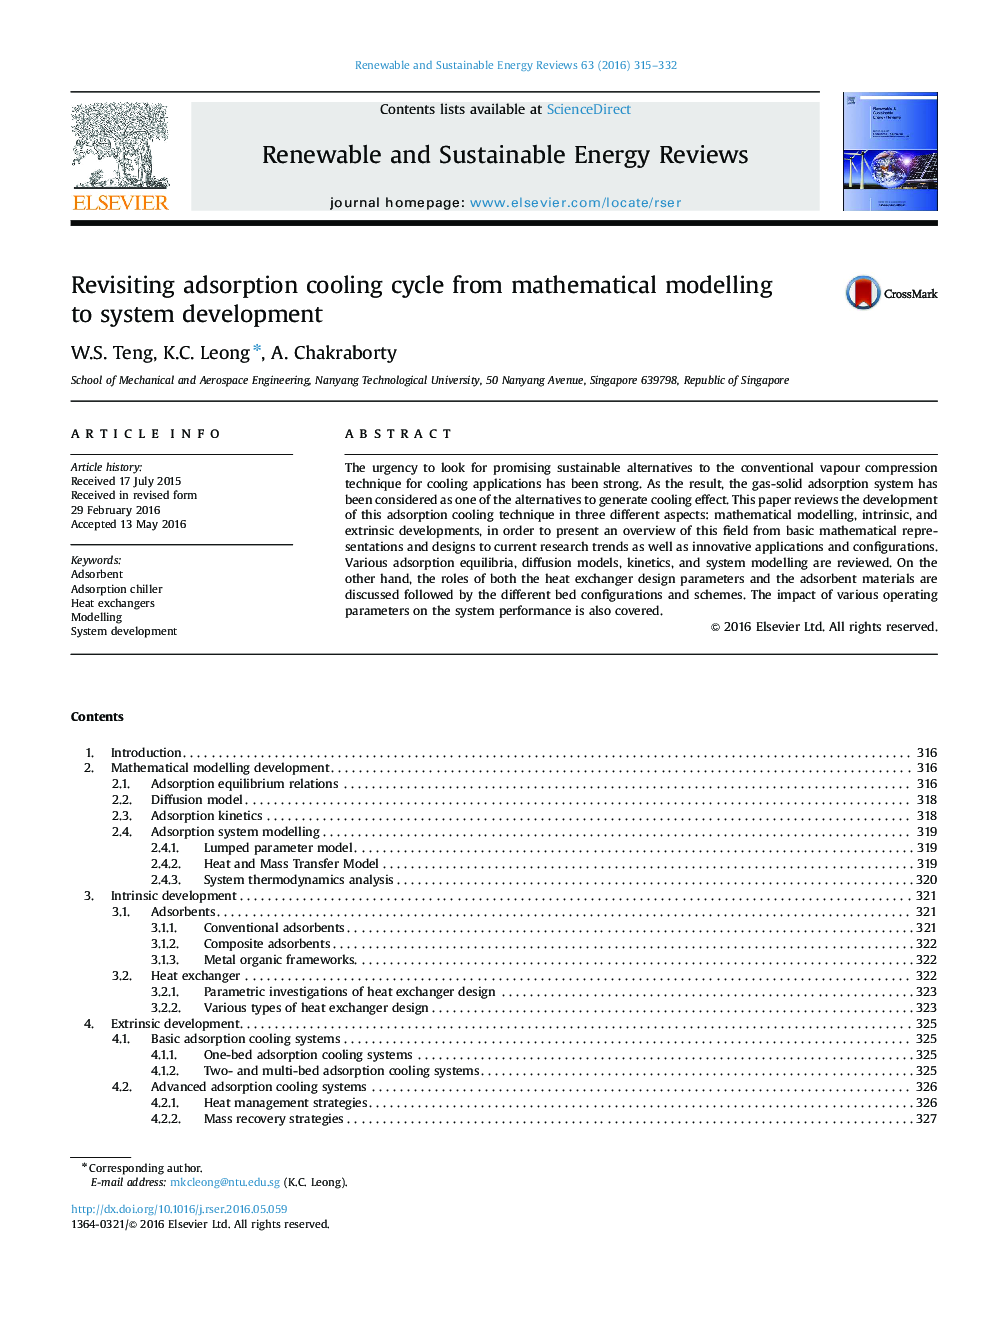 Revisiting adsorption cooling cycle from mathematical modelling to system development